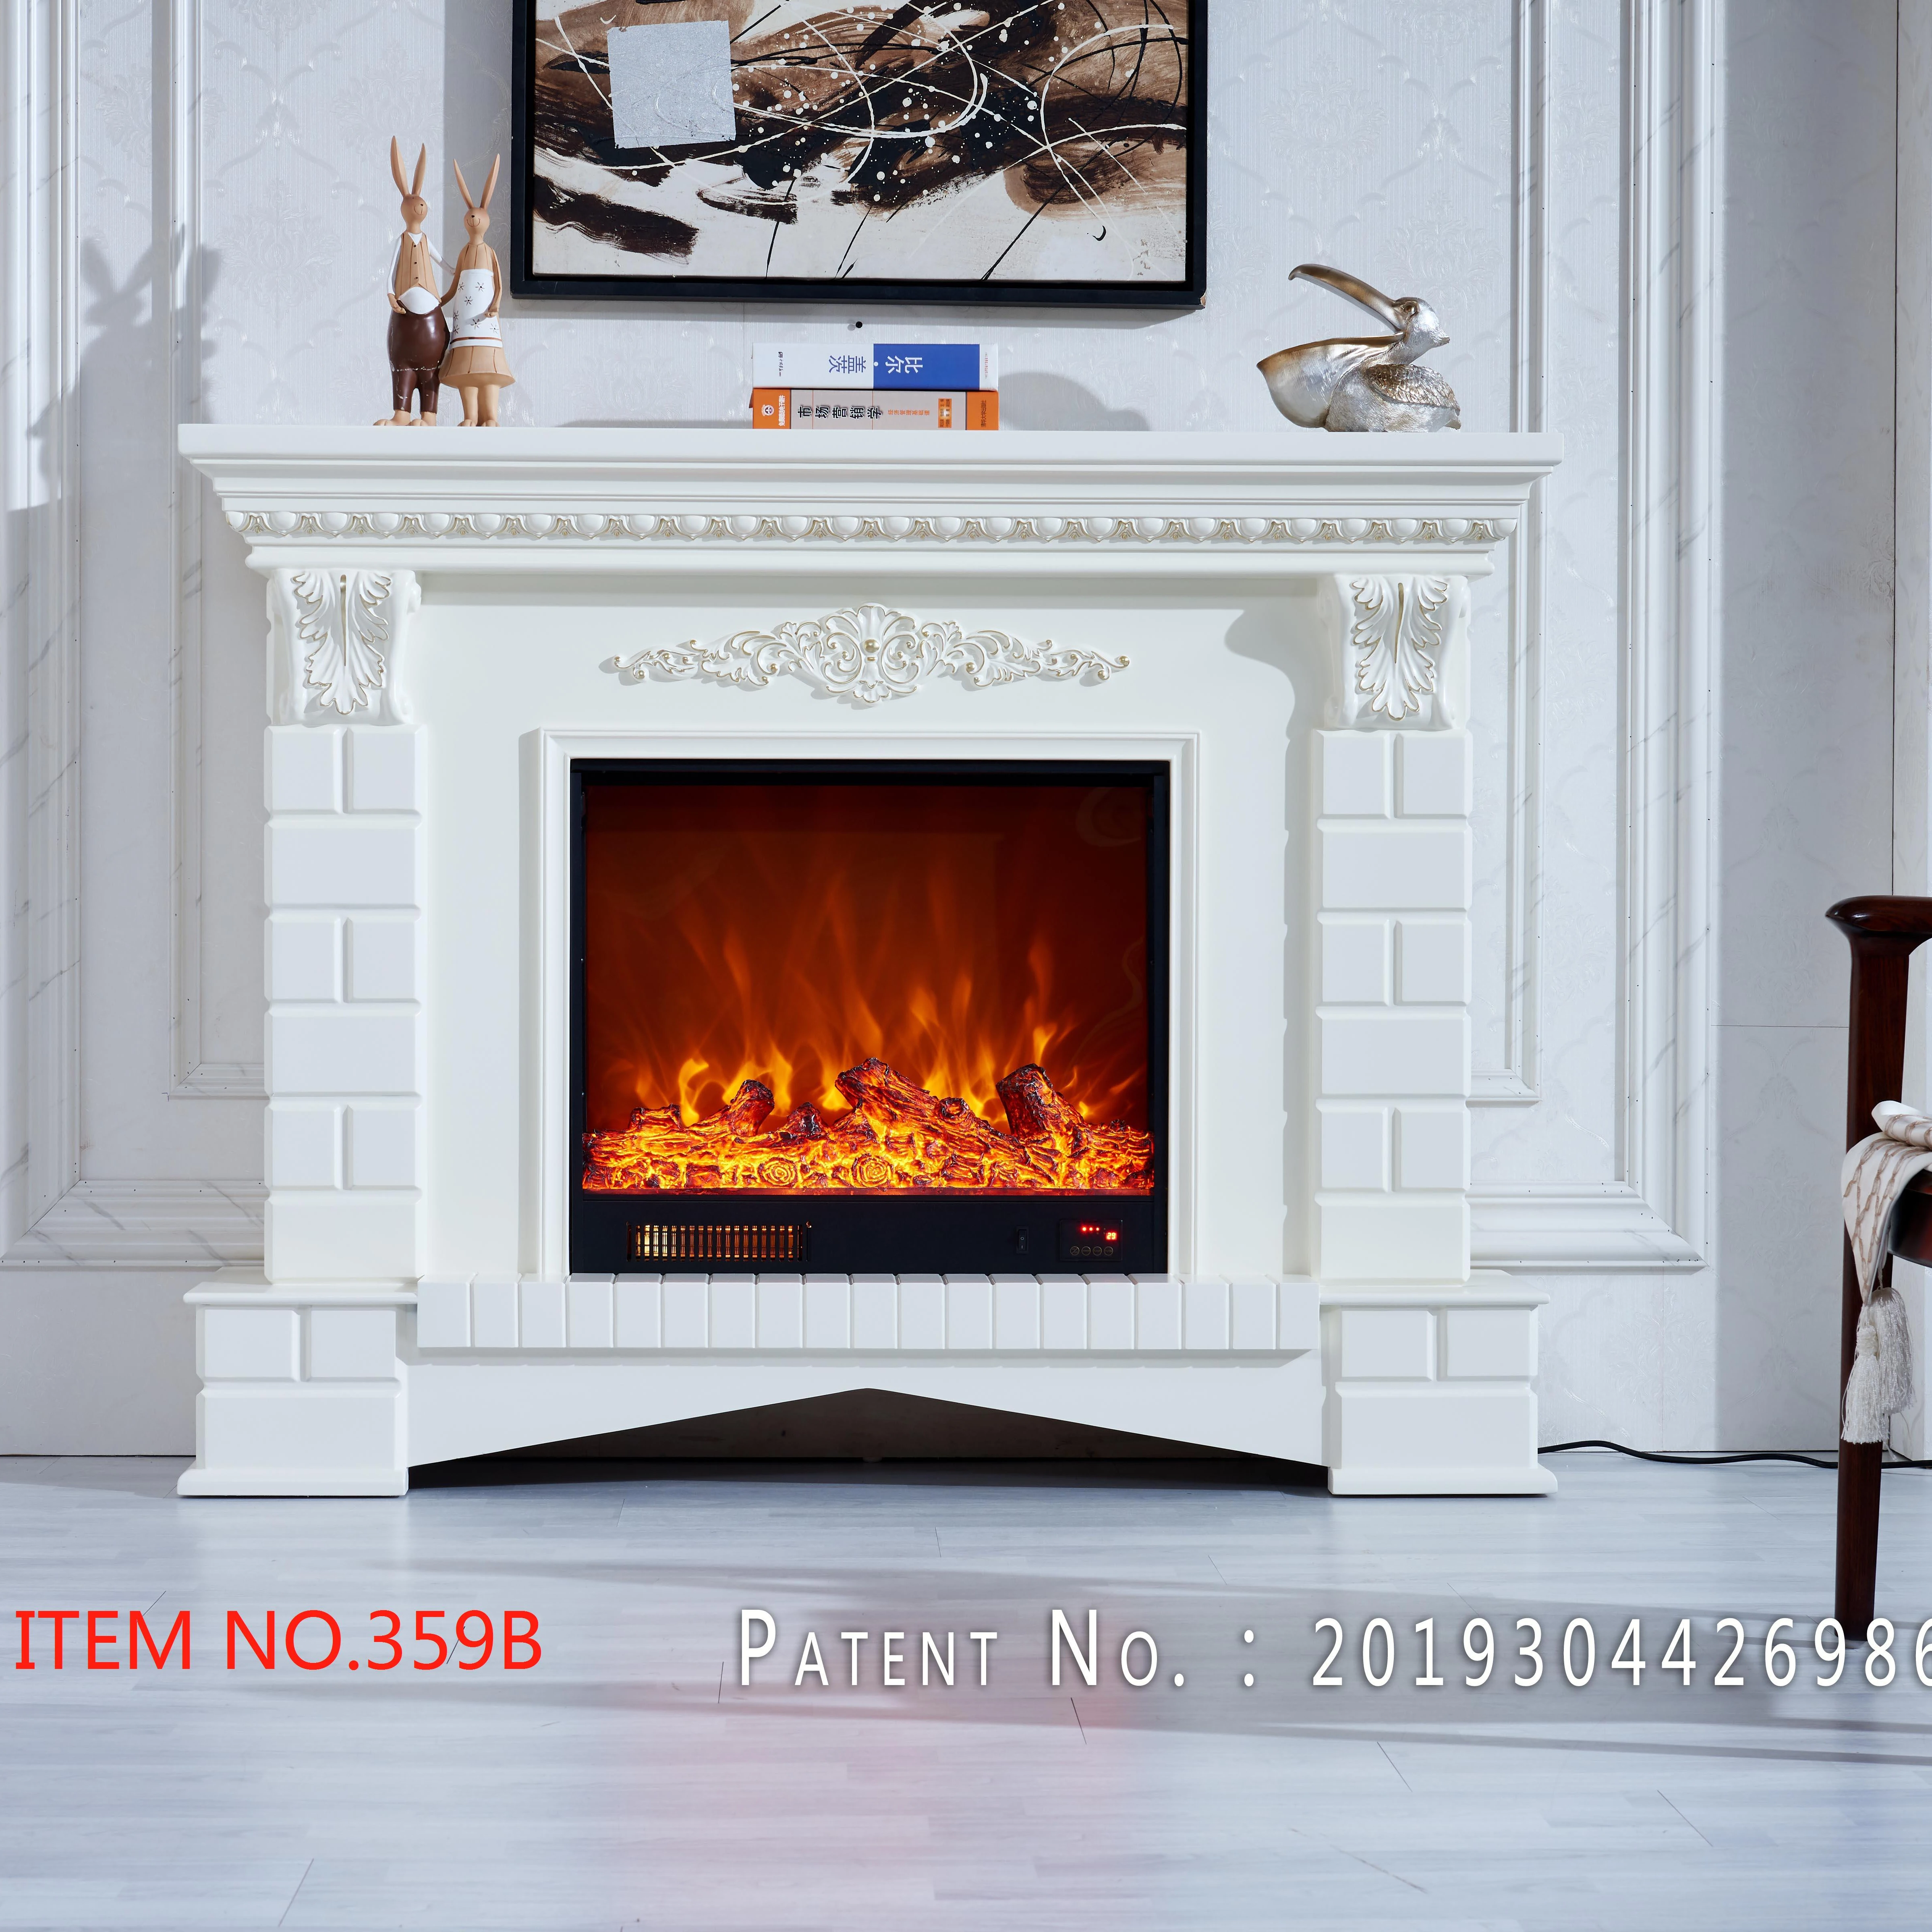 series 359 Effect of bricks resin carving heating stove electric flame effect fireplace